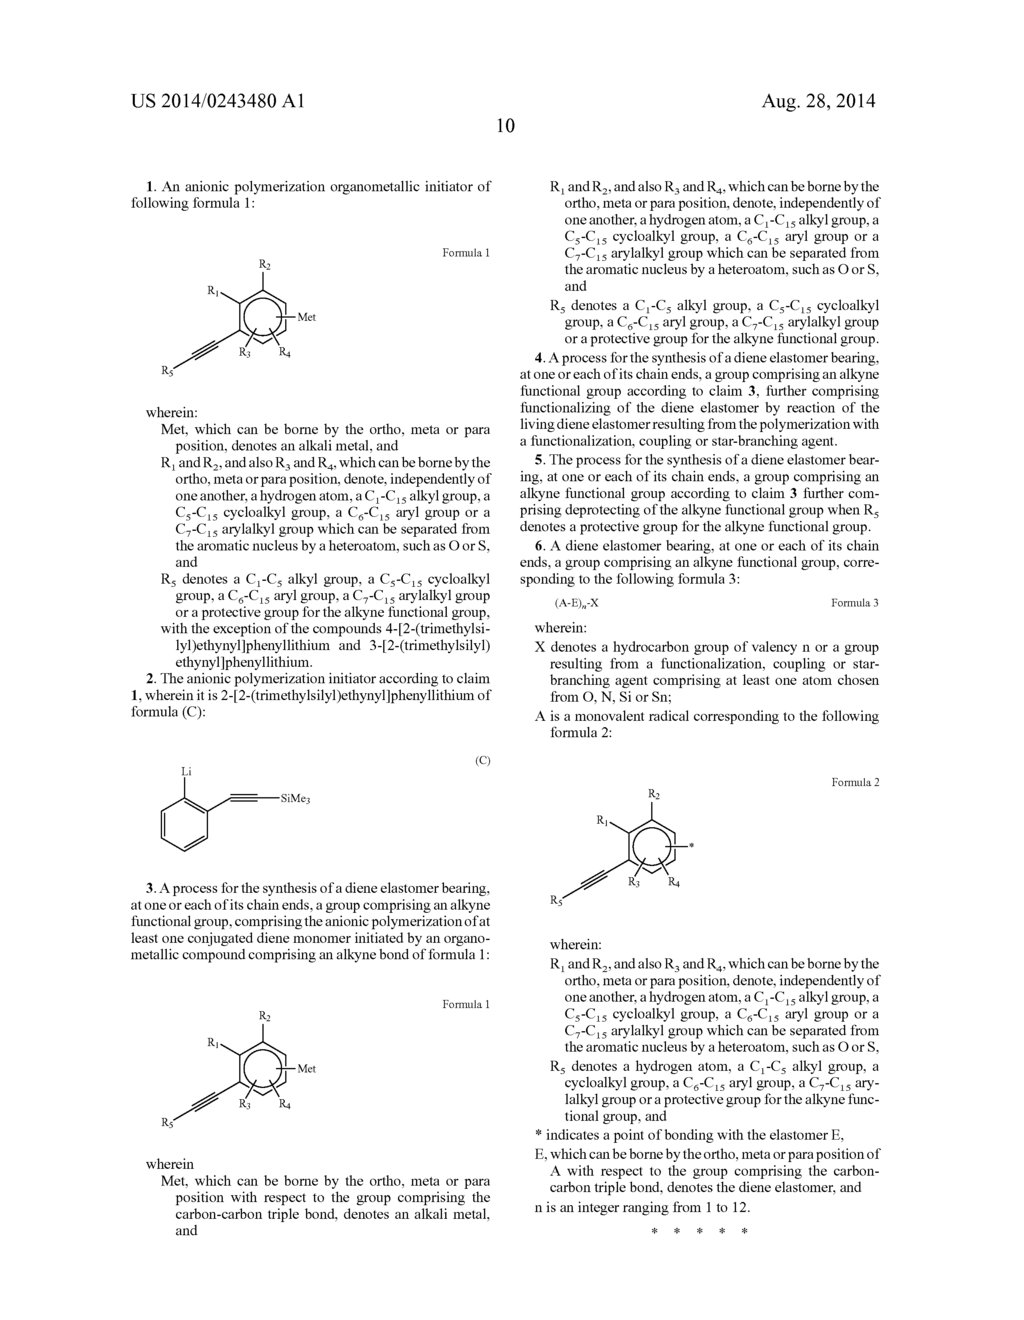 NOVEL ANIONIC POLYMERIZATION INITIATOR, USE THEREOF FOR SYNTHESIZING A     DIENE ELASTOMER HAVING AN ALKYNE FUNCTION AT THE CHAIN END, AND     FUNCIONALIZED DIENE ELASTOMER - diagram, schematic, and image 11